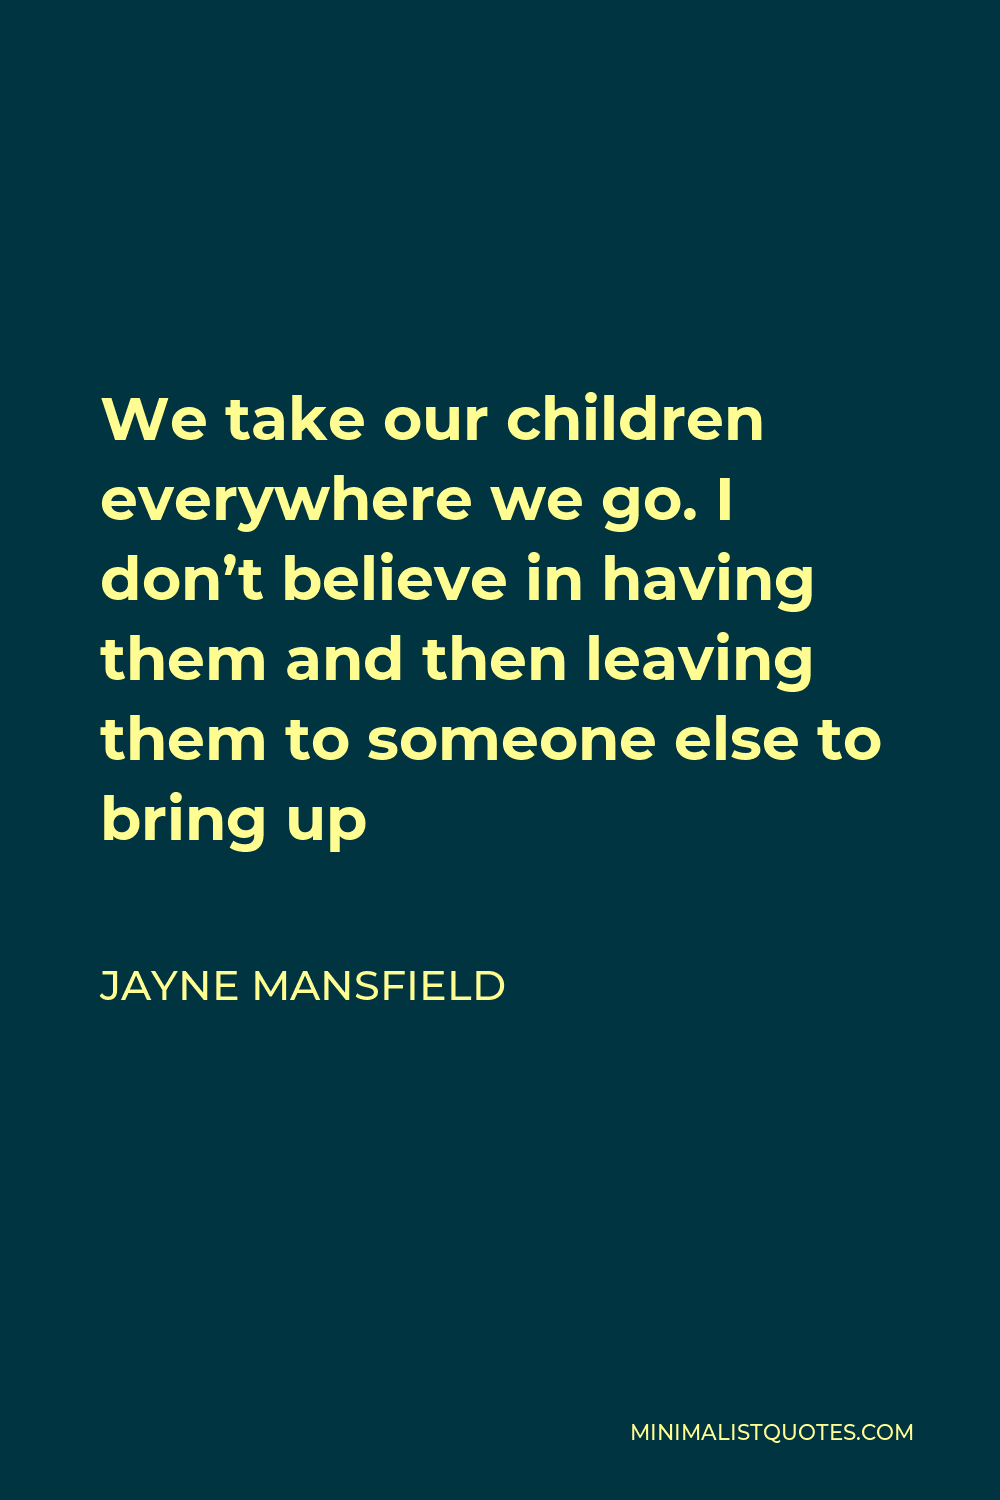 Jayne Mansfield Quote - We take our children everywhere we go. I don’t believe in having them and then leaving them to someone else to bring up